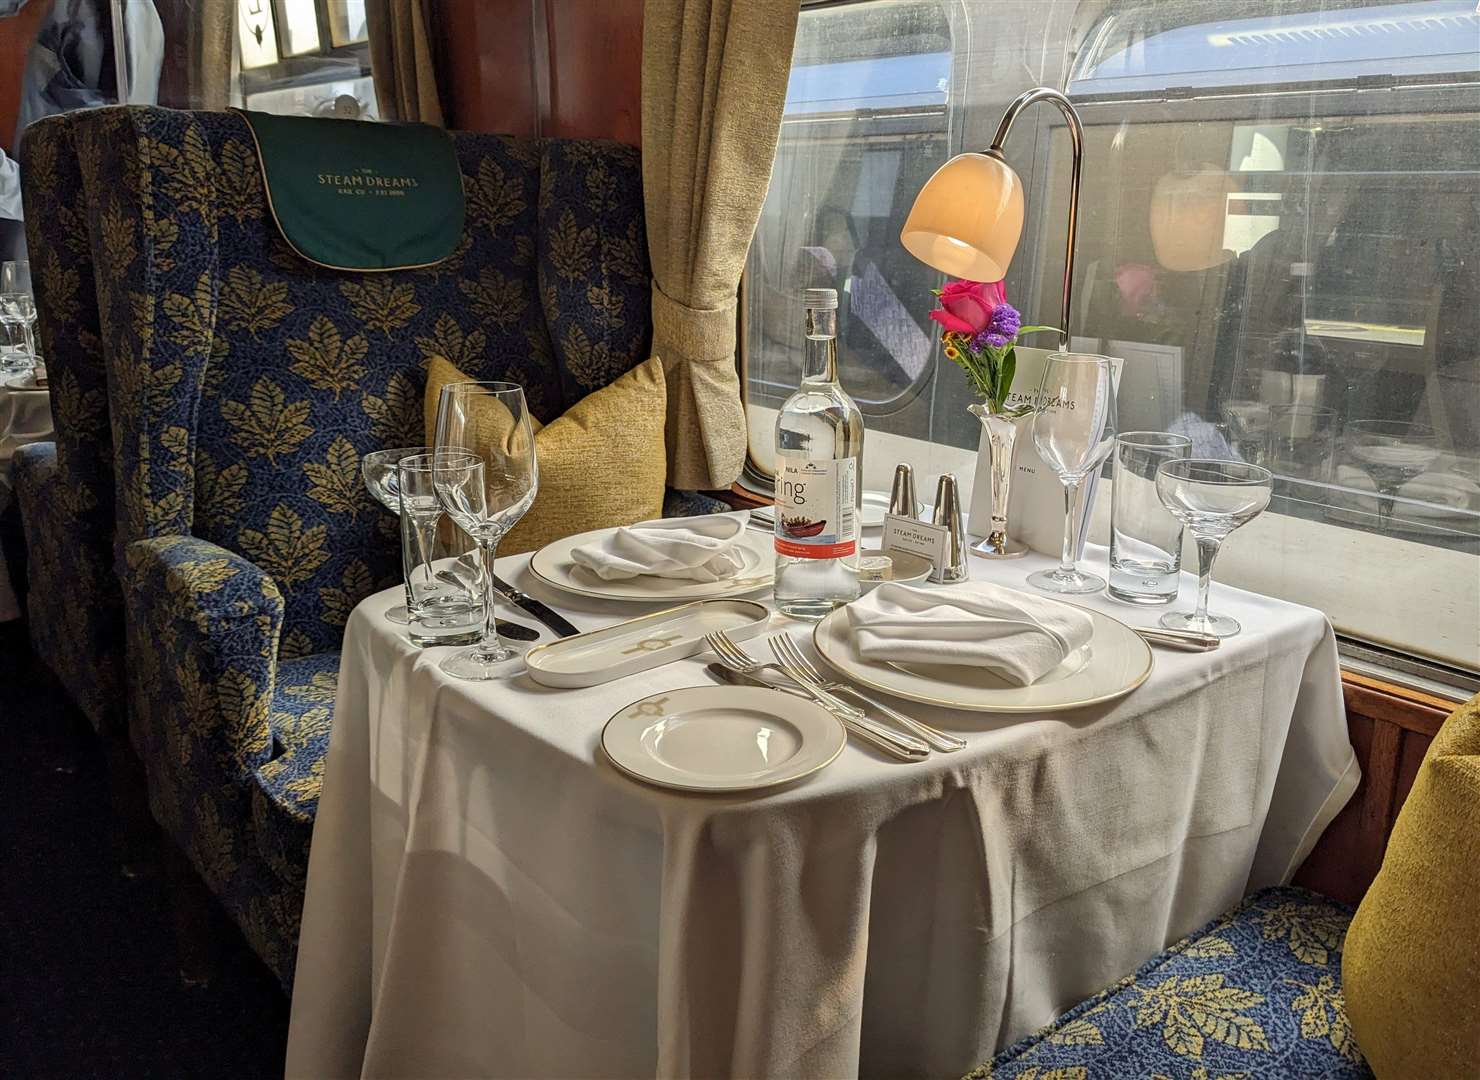 A table for two in the Pullman-style dining carriage